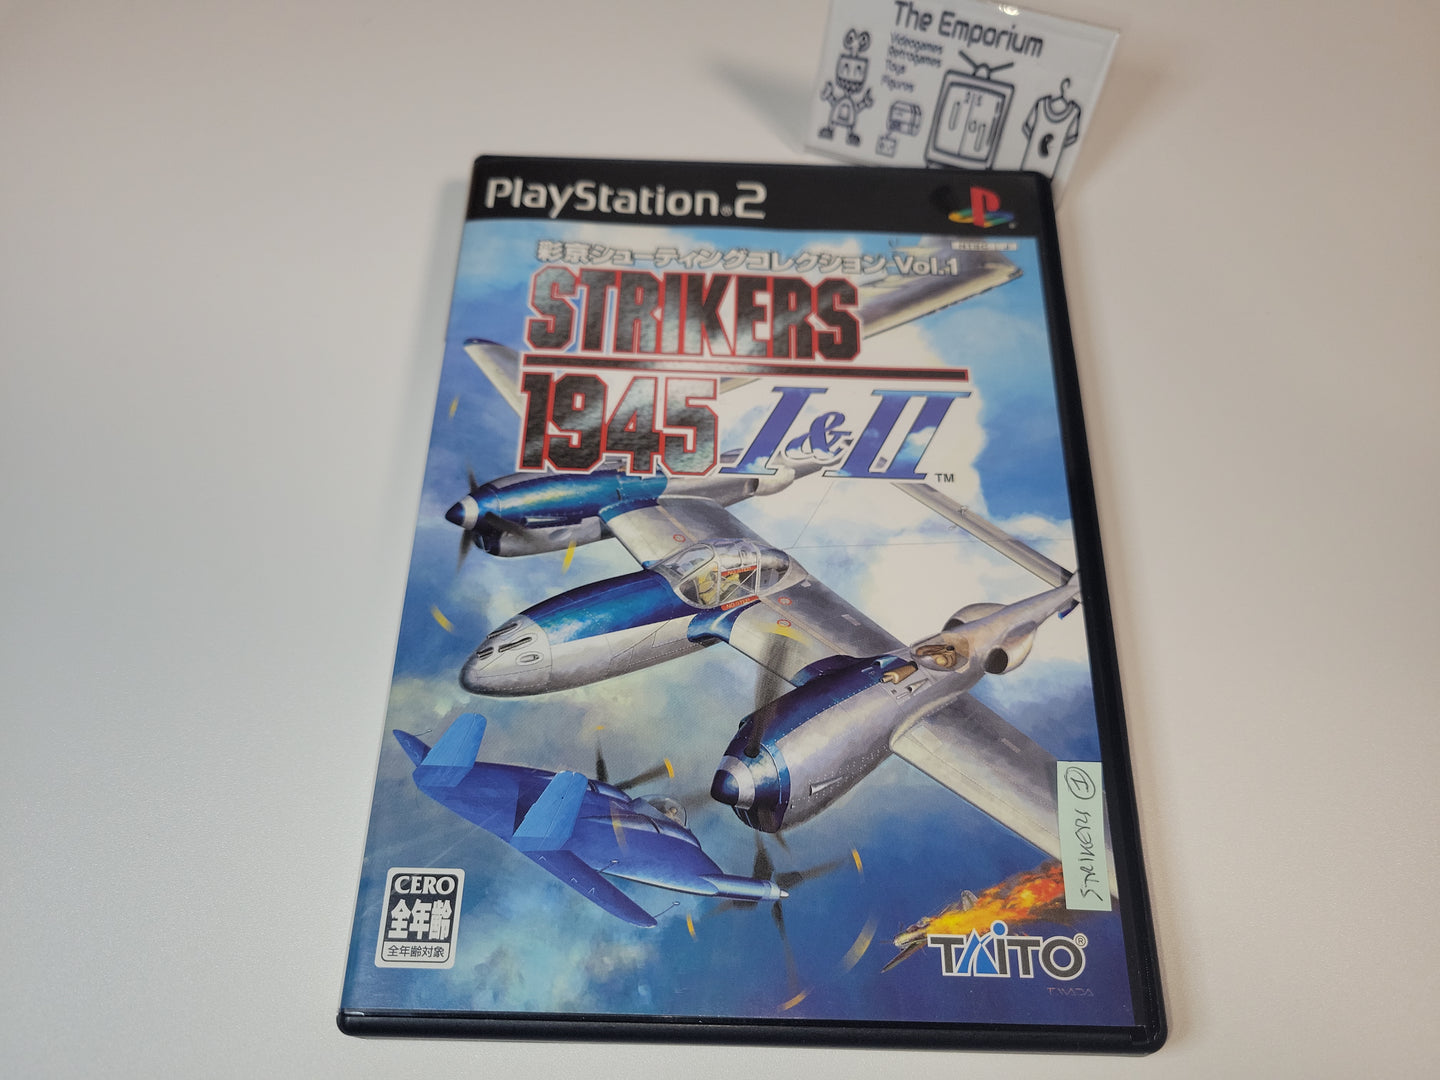 PSIKYO COLLECTION Vol 1  Strikers 1945 I+II - Sony playstation 2